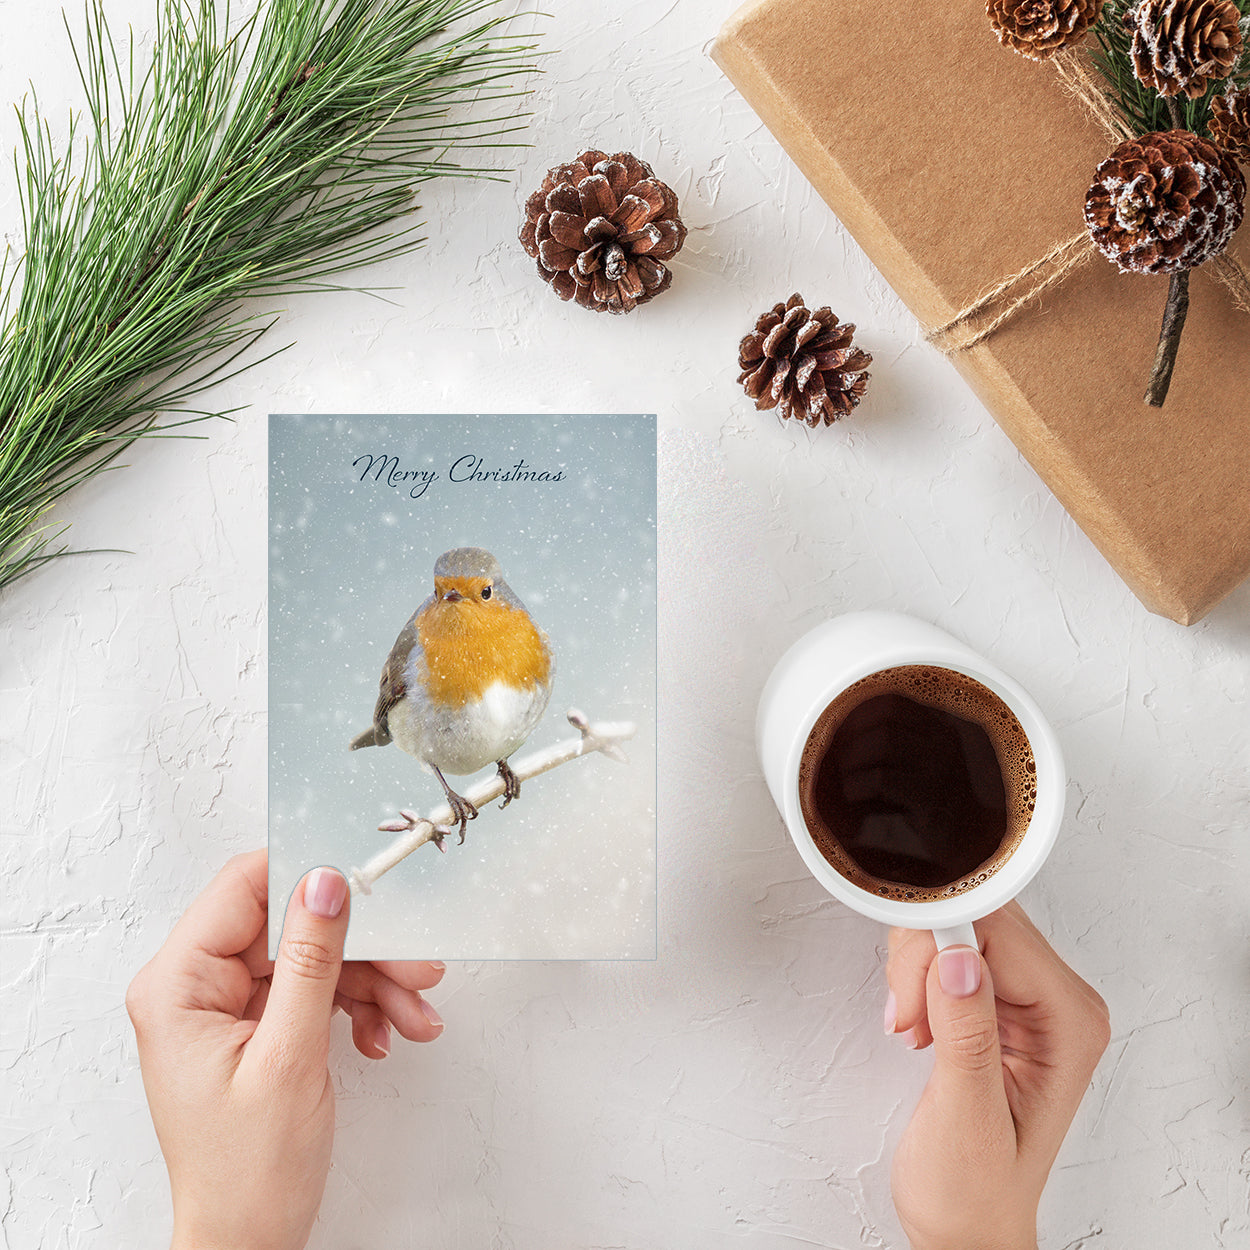 Winter Robin - Pack of 20 Personalised